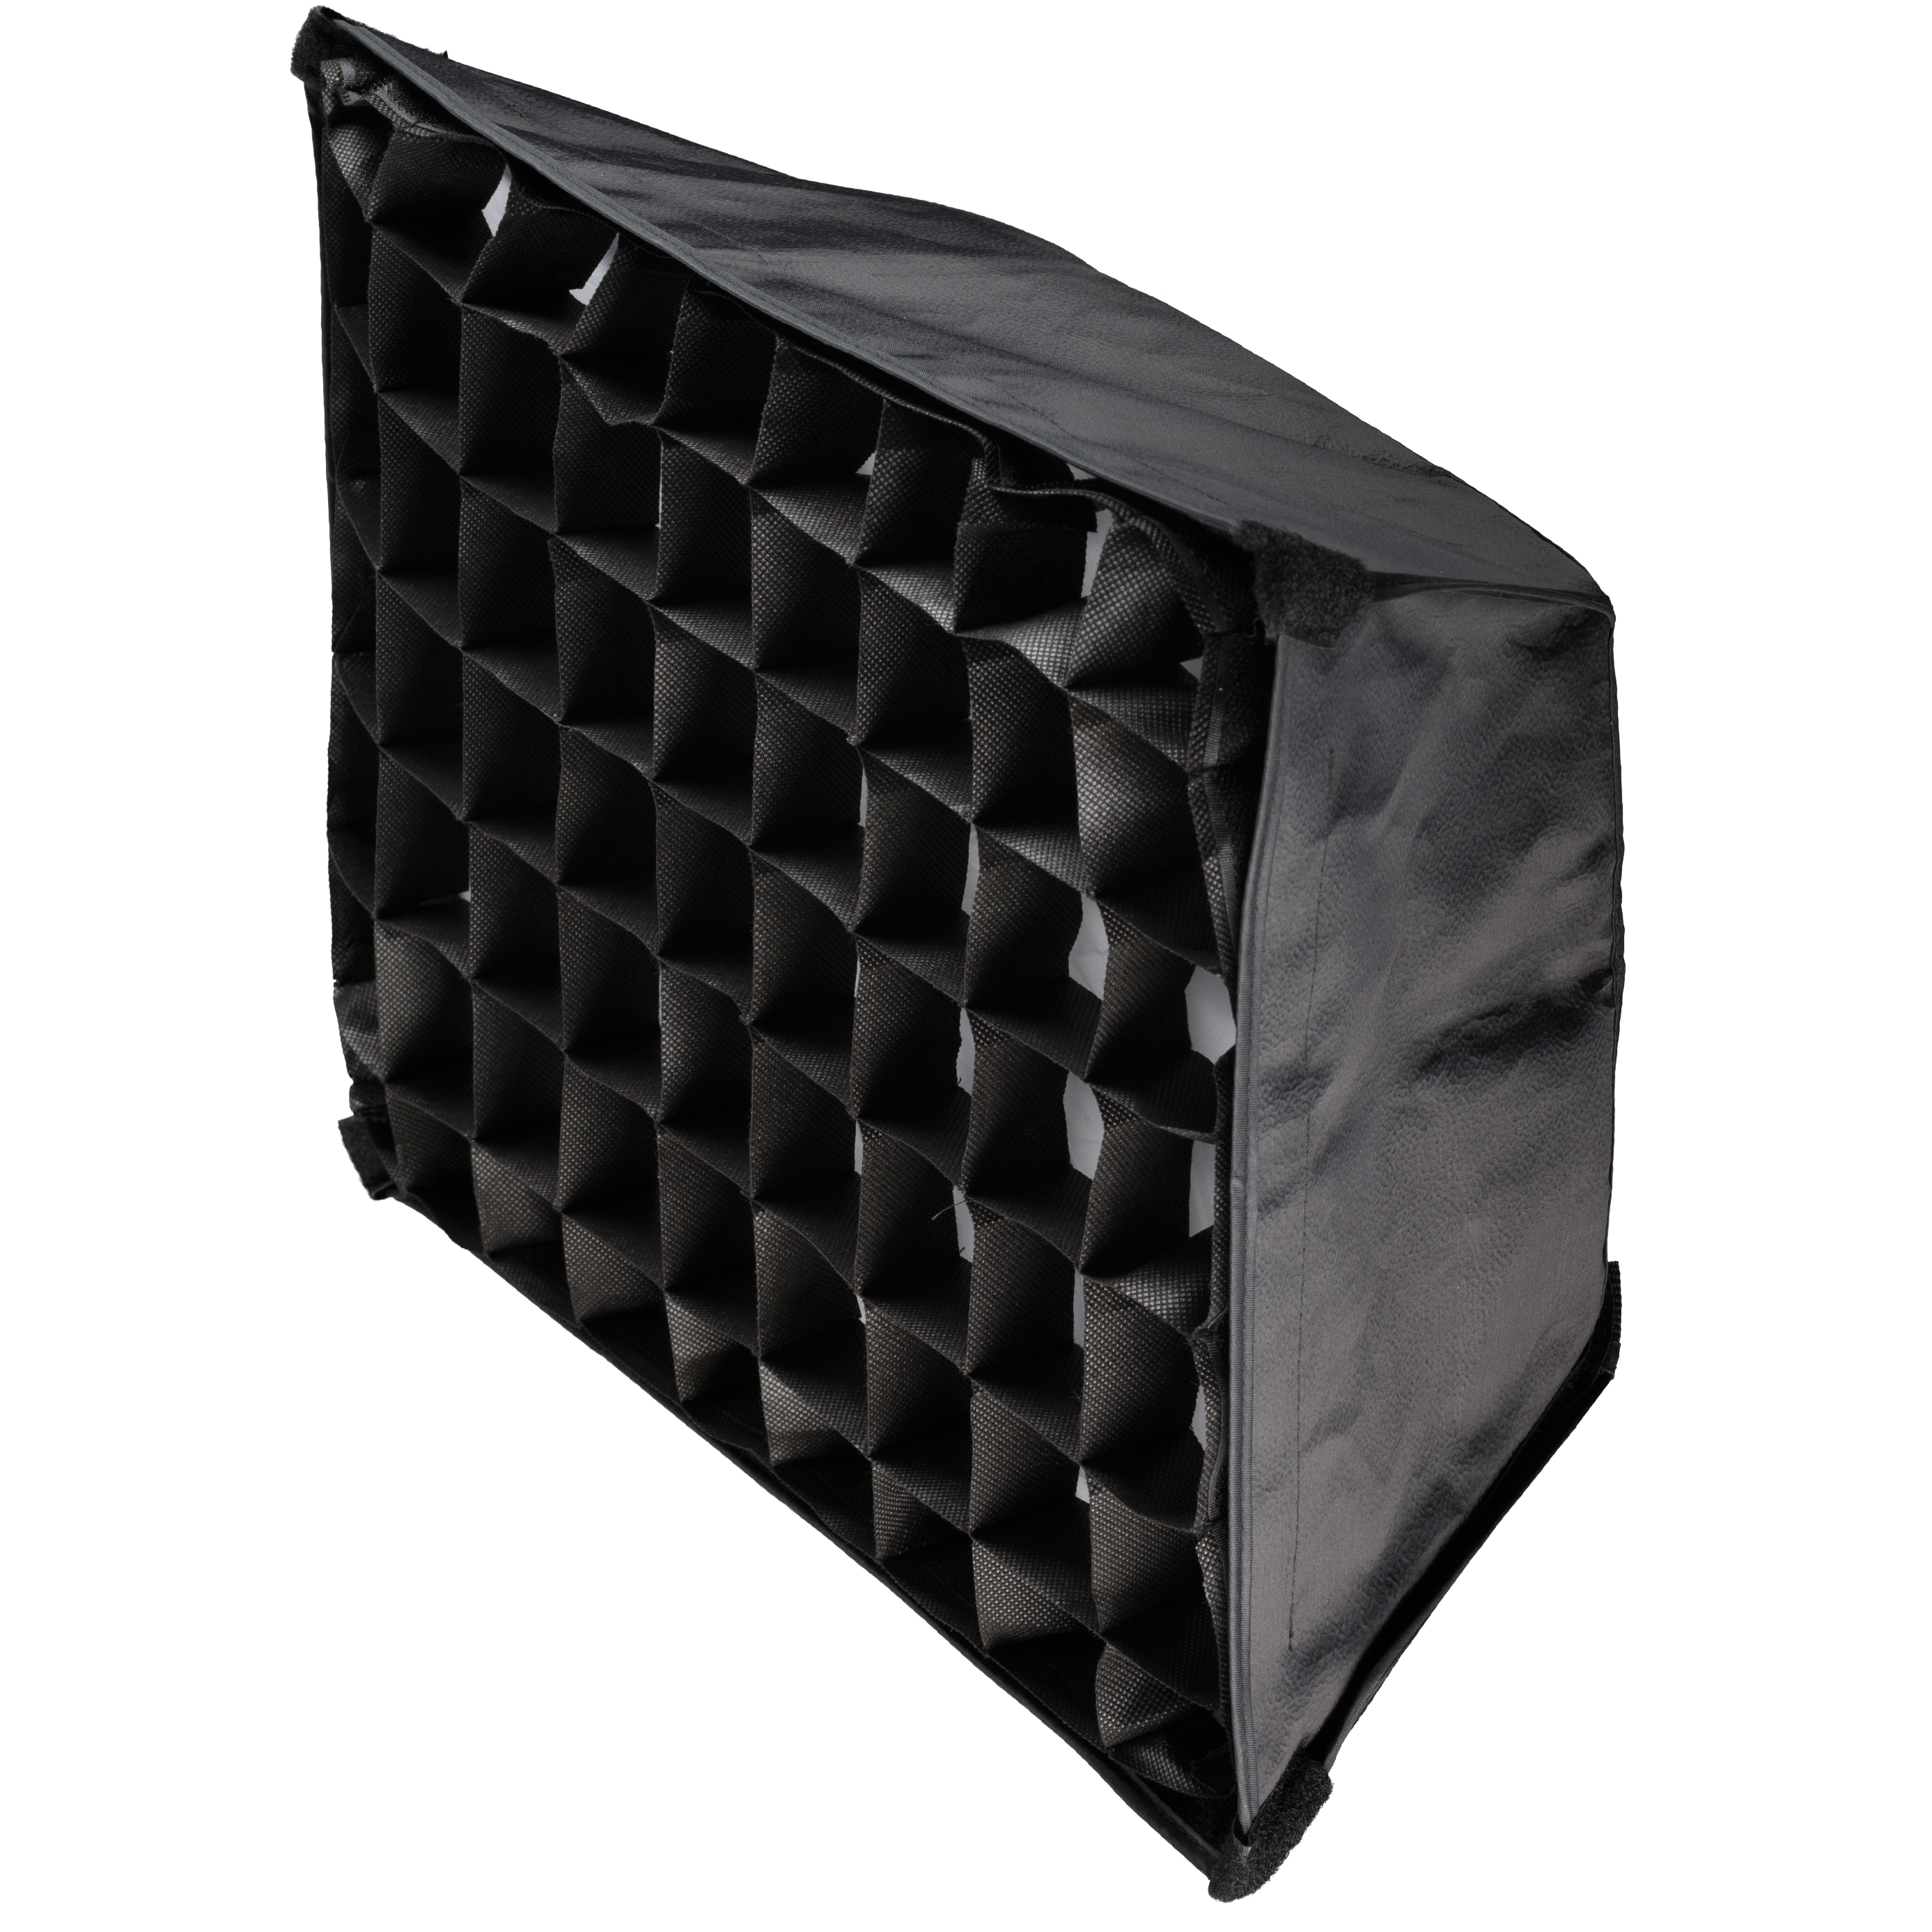 BRESSER Softbox and Honeycomb Grid for BR-S36B PRO Bi-Colour LED Panel Lamp 36W